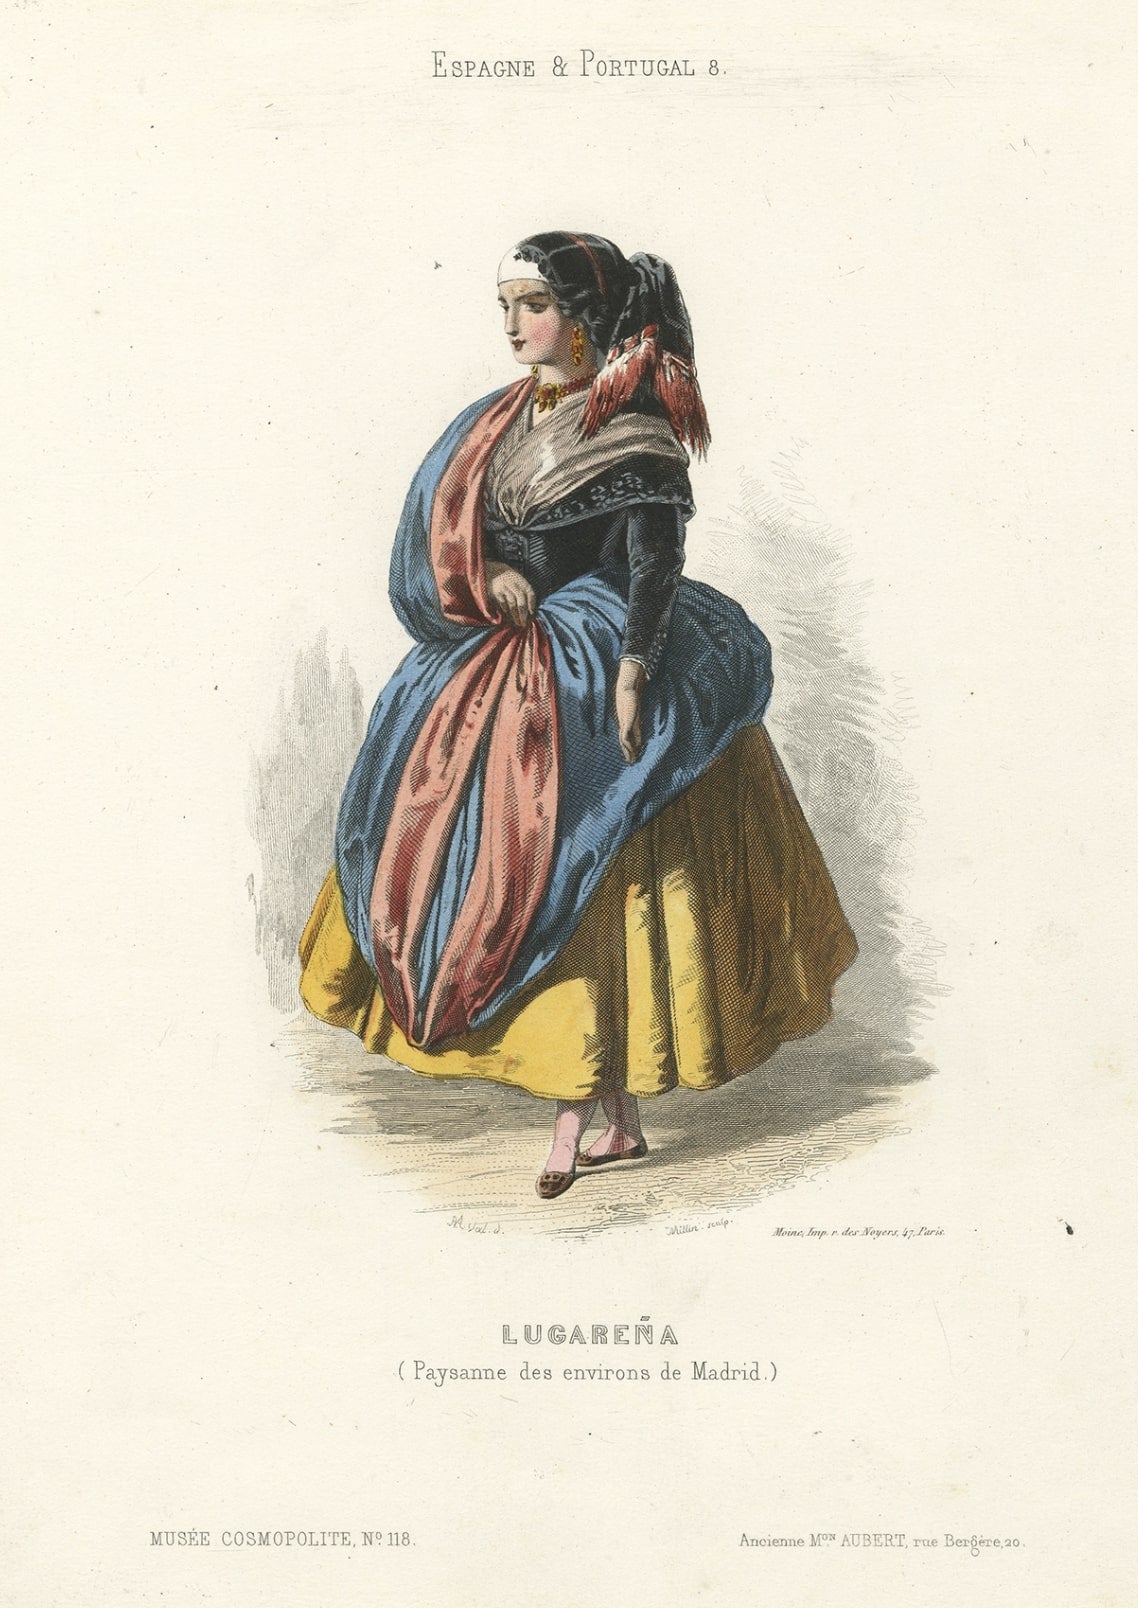 Antique costume print titled 'Lugarena (Paysanne des Environs de Madrid)'. Old print depicting a farmer's wife from the region of Madrid, Spain. This print originates from 'Costumes Moderne (Musée de Costumes). 

Artists and Engravers: Published